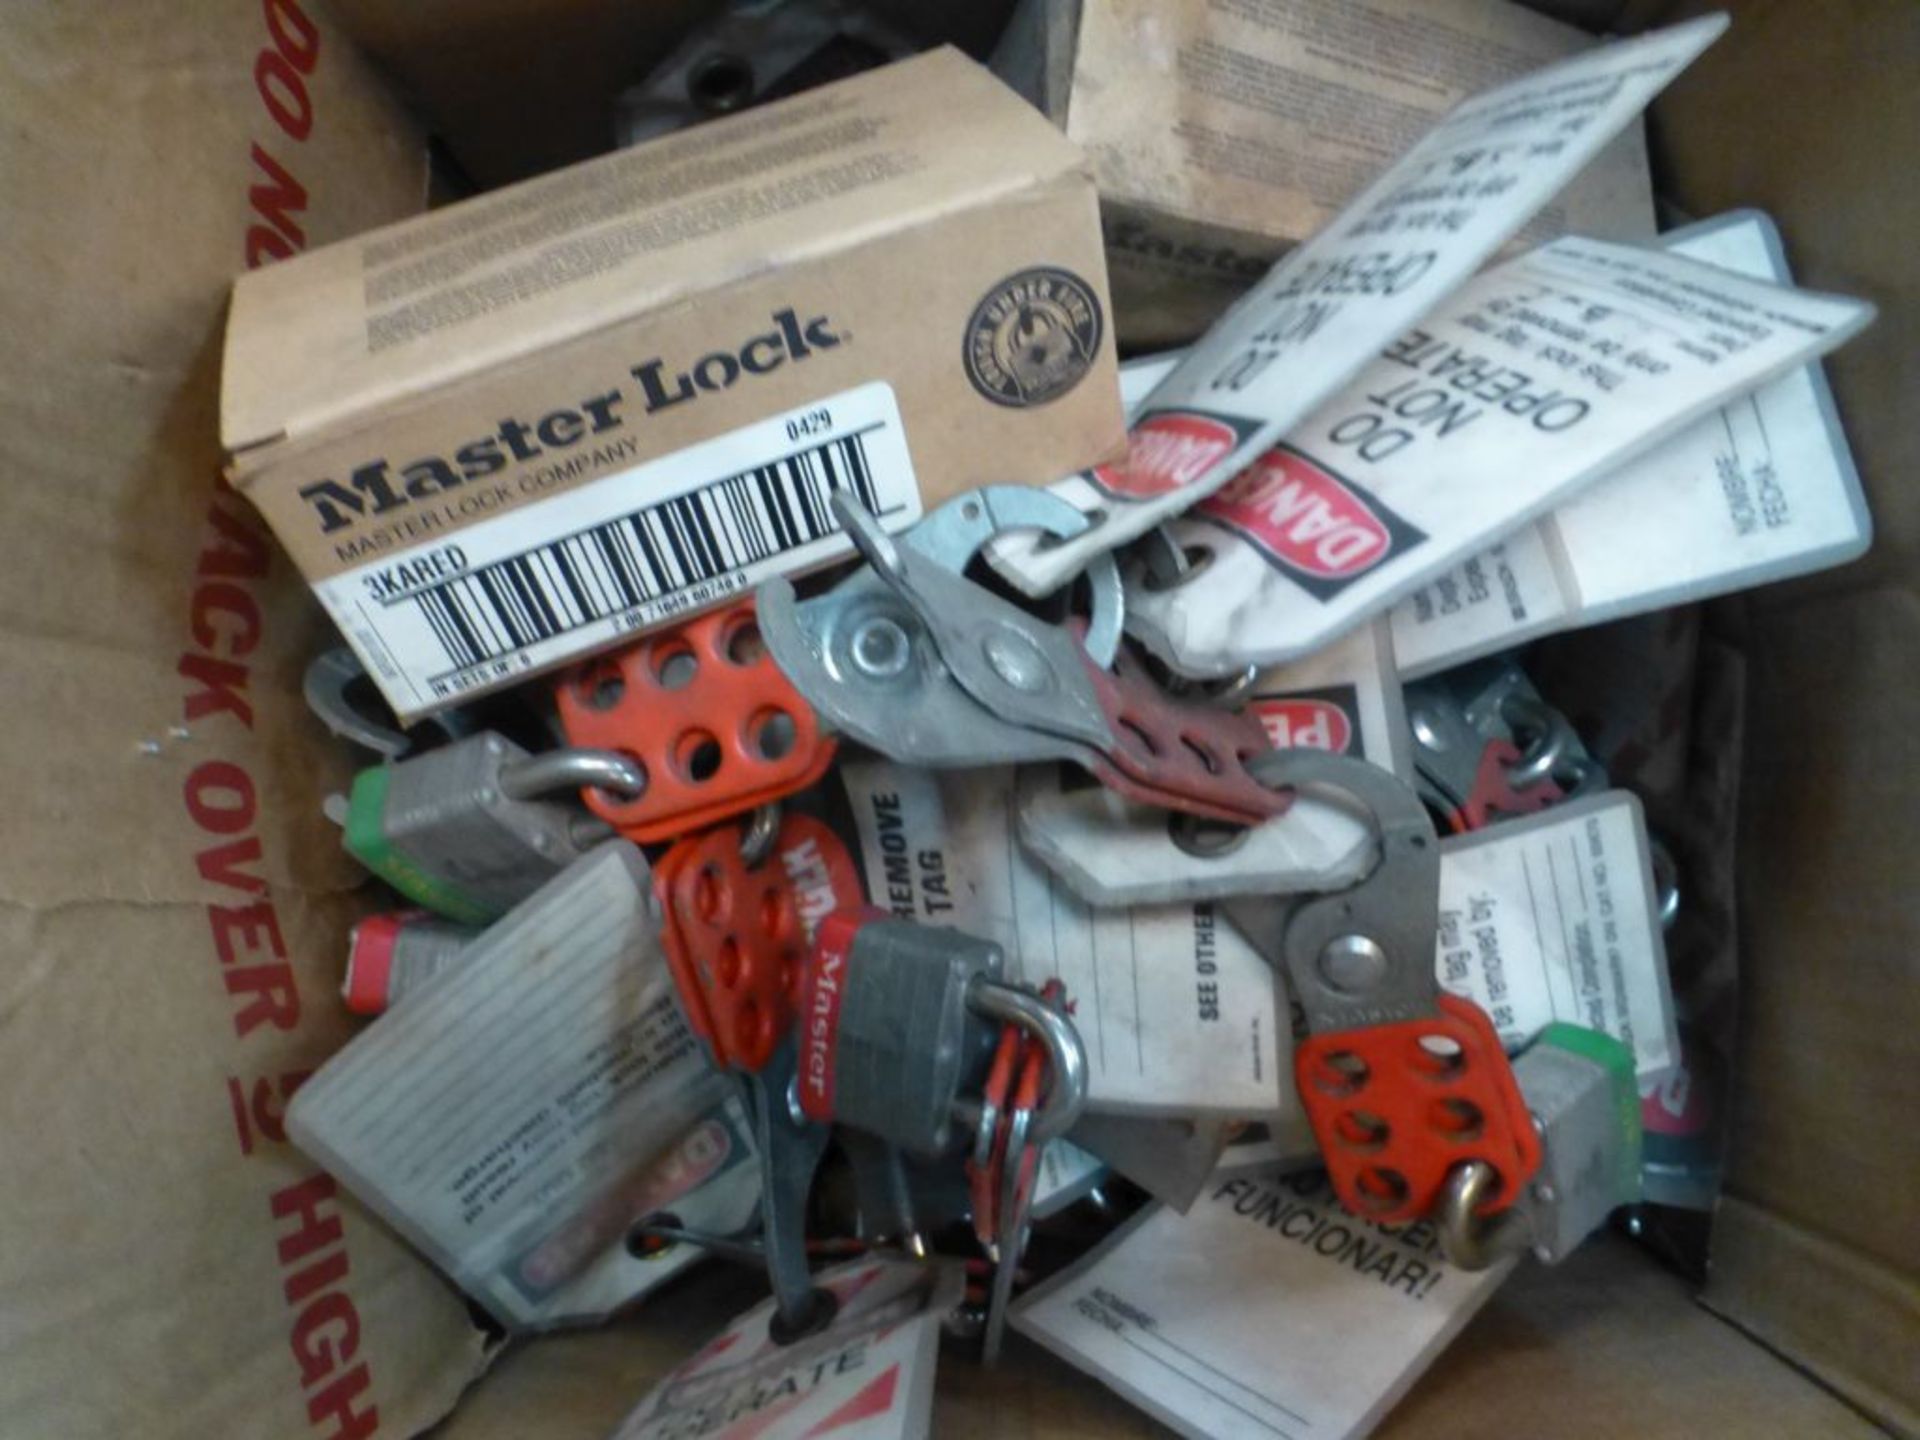 Lot of Assorted Masterlock Locks and Electrical Lockouts - Tag: 219557 - Image 8 of 8